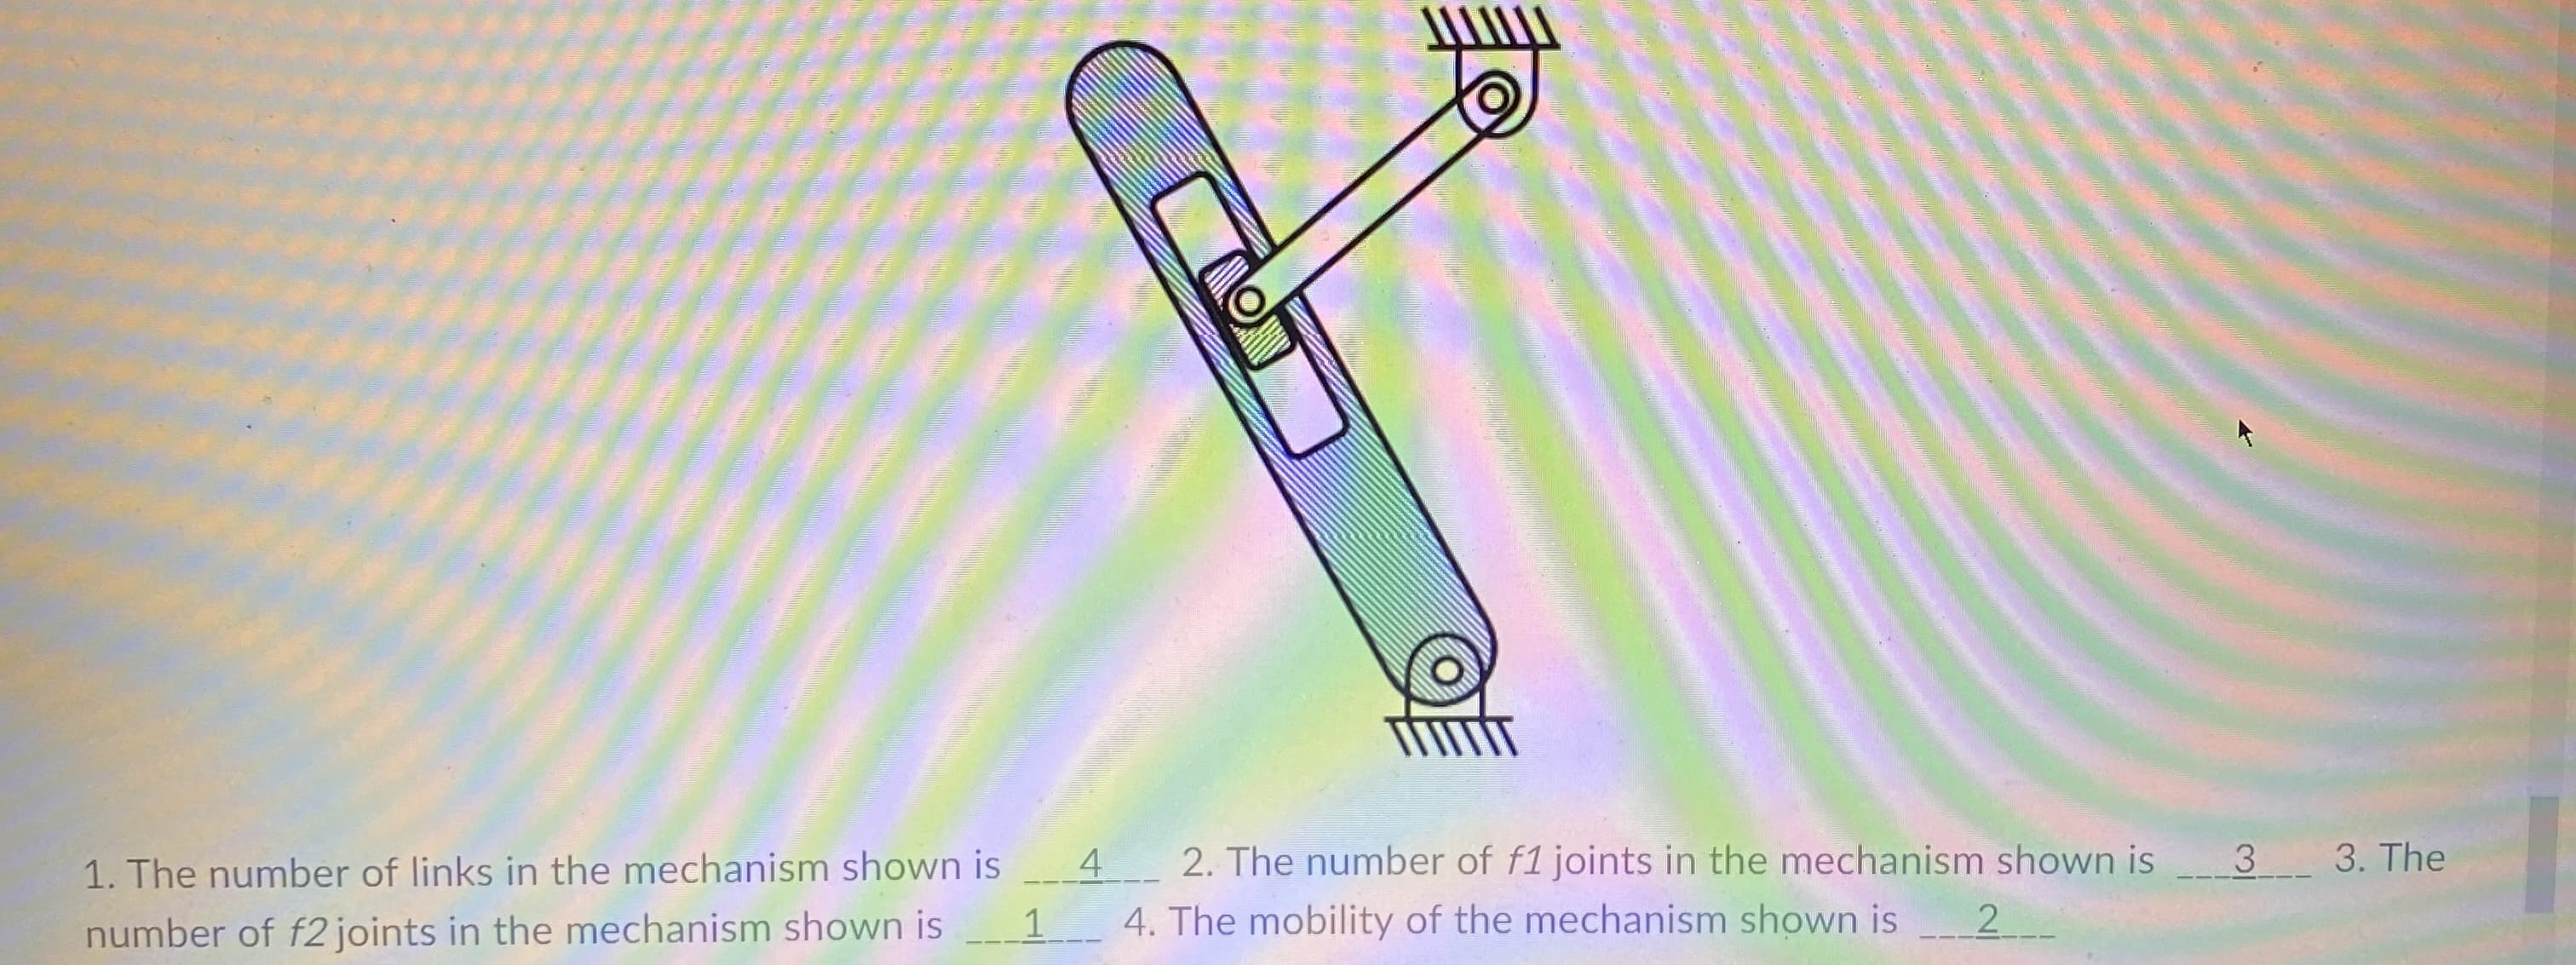 3 3. The
2. The number of f1 joints in the mechanism shown is
4.
1. The number of links in the mechanism shown is
1
2-
4. The mobility of the mechanism shown is
number of f2 joints in the mechanism shown is
